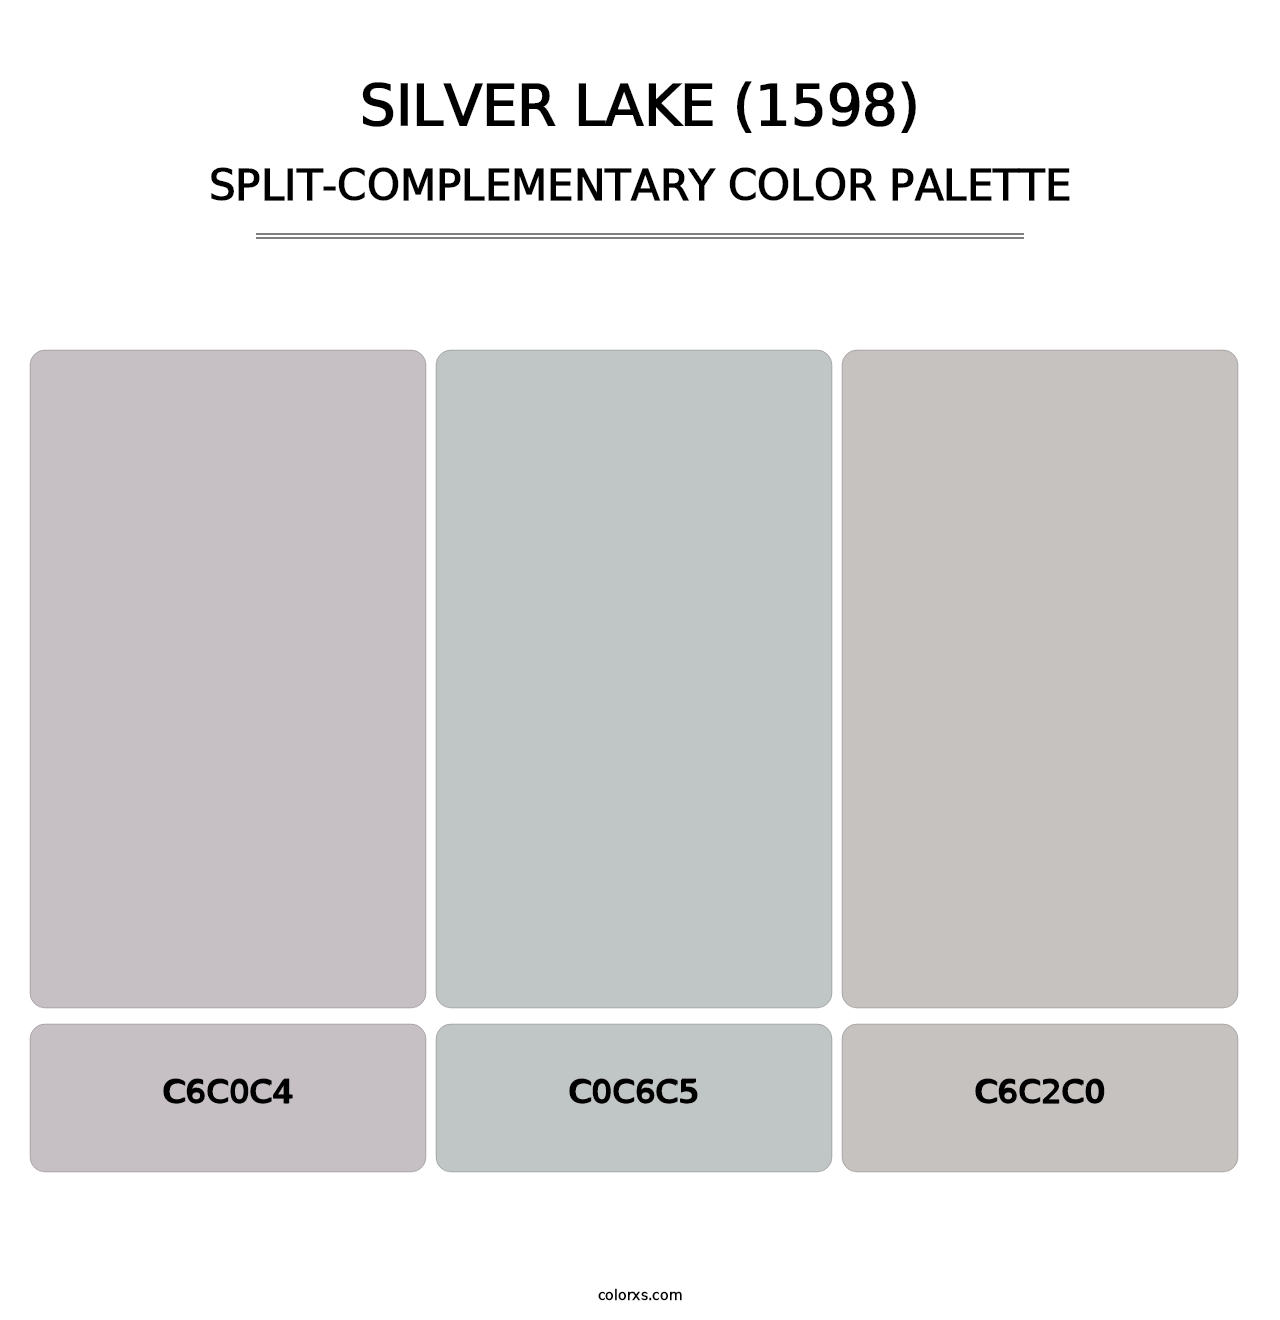 Silver Lake (1598) - Split-Complementary Color Palette